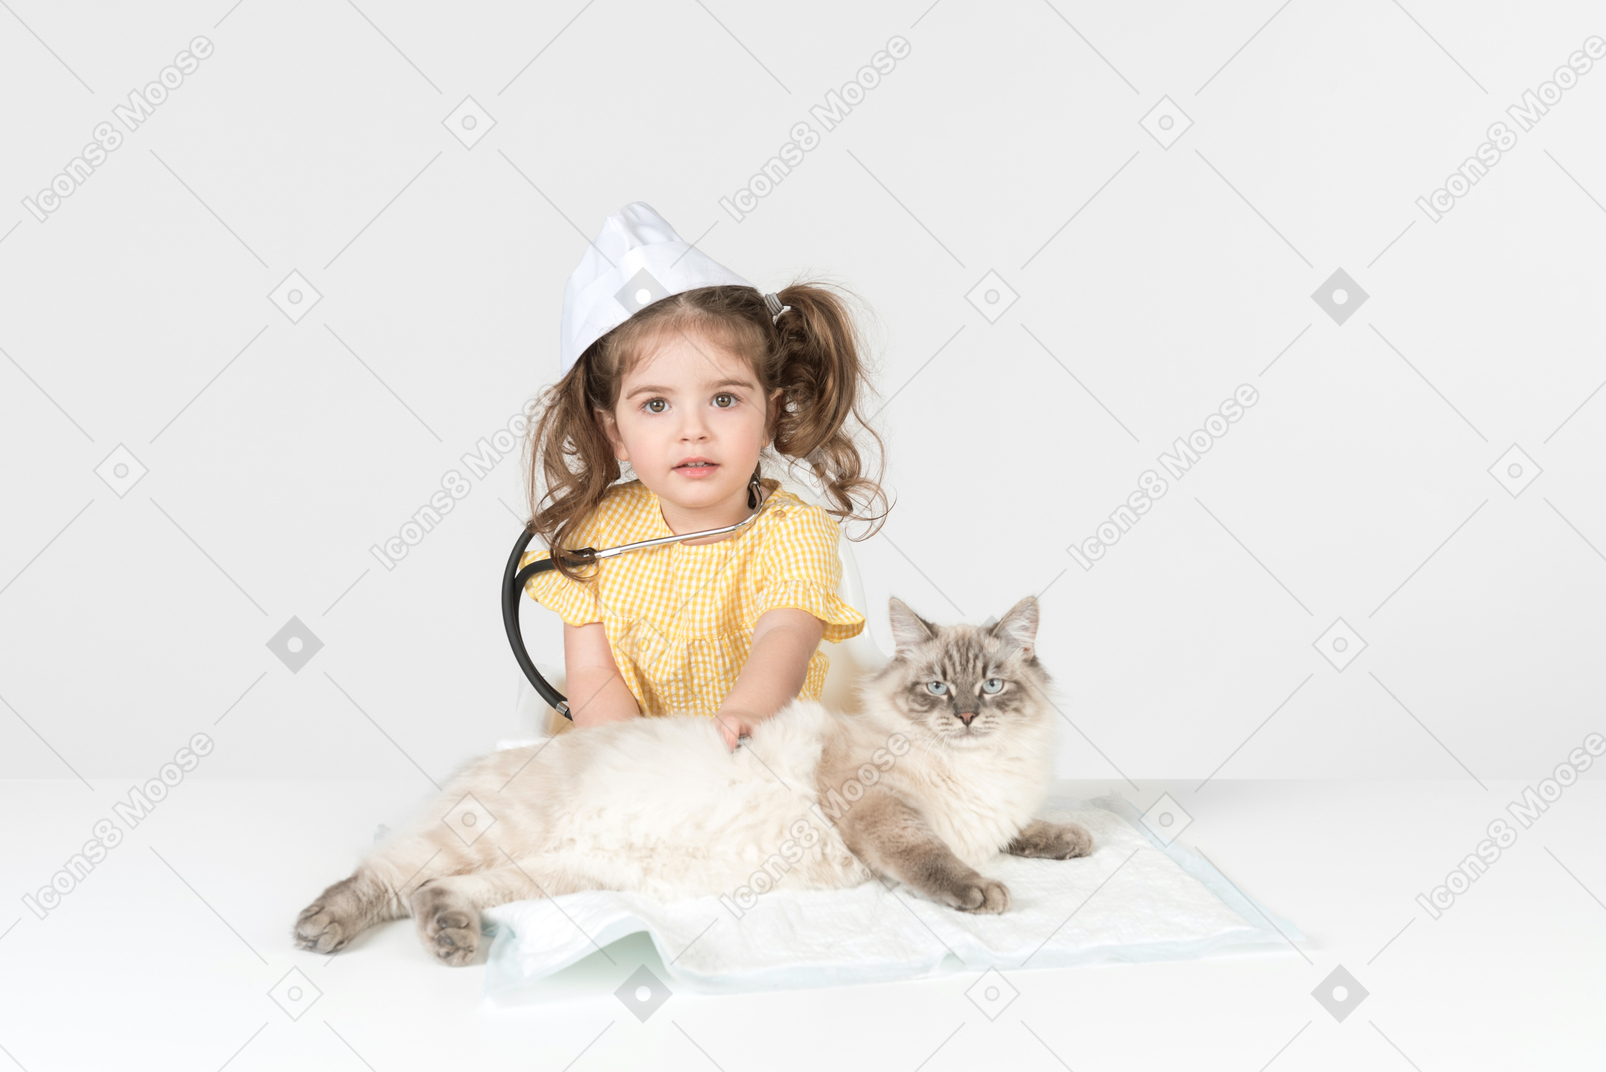 Little kid girl with stethoscope and wearing medical hat curing a cat